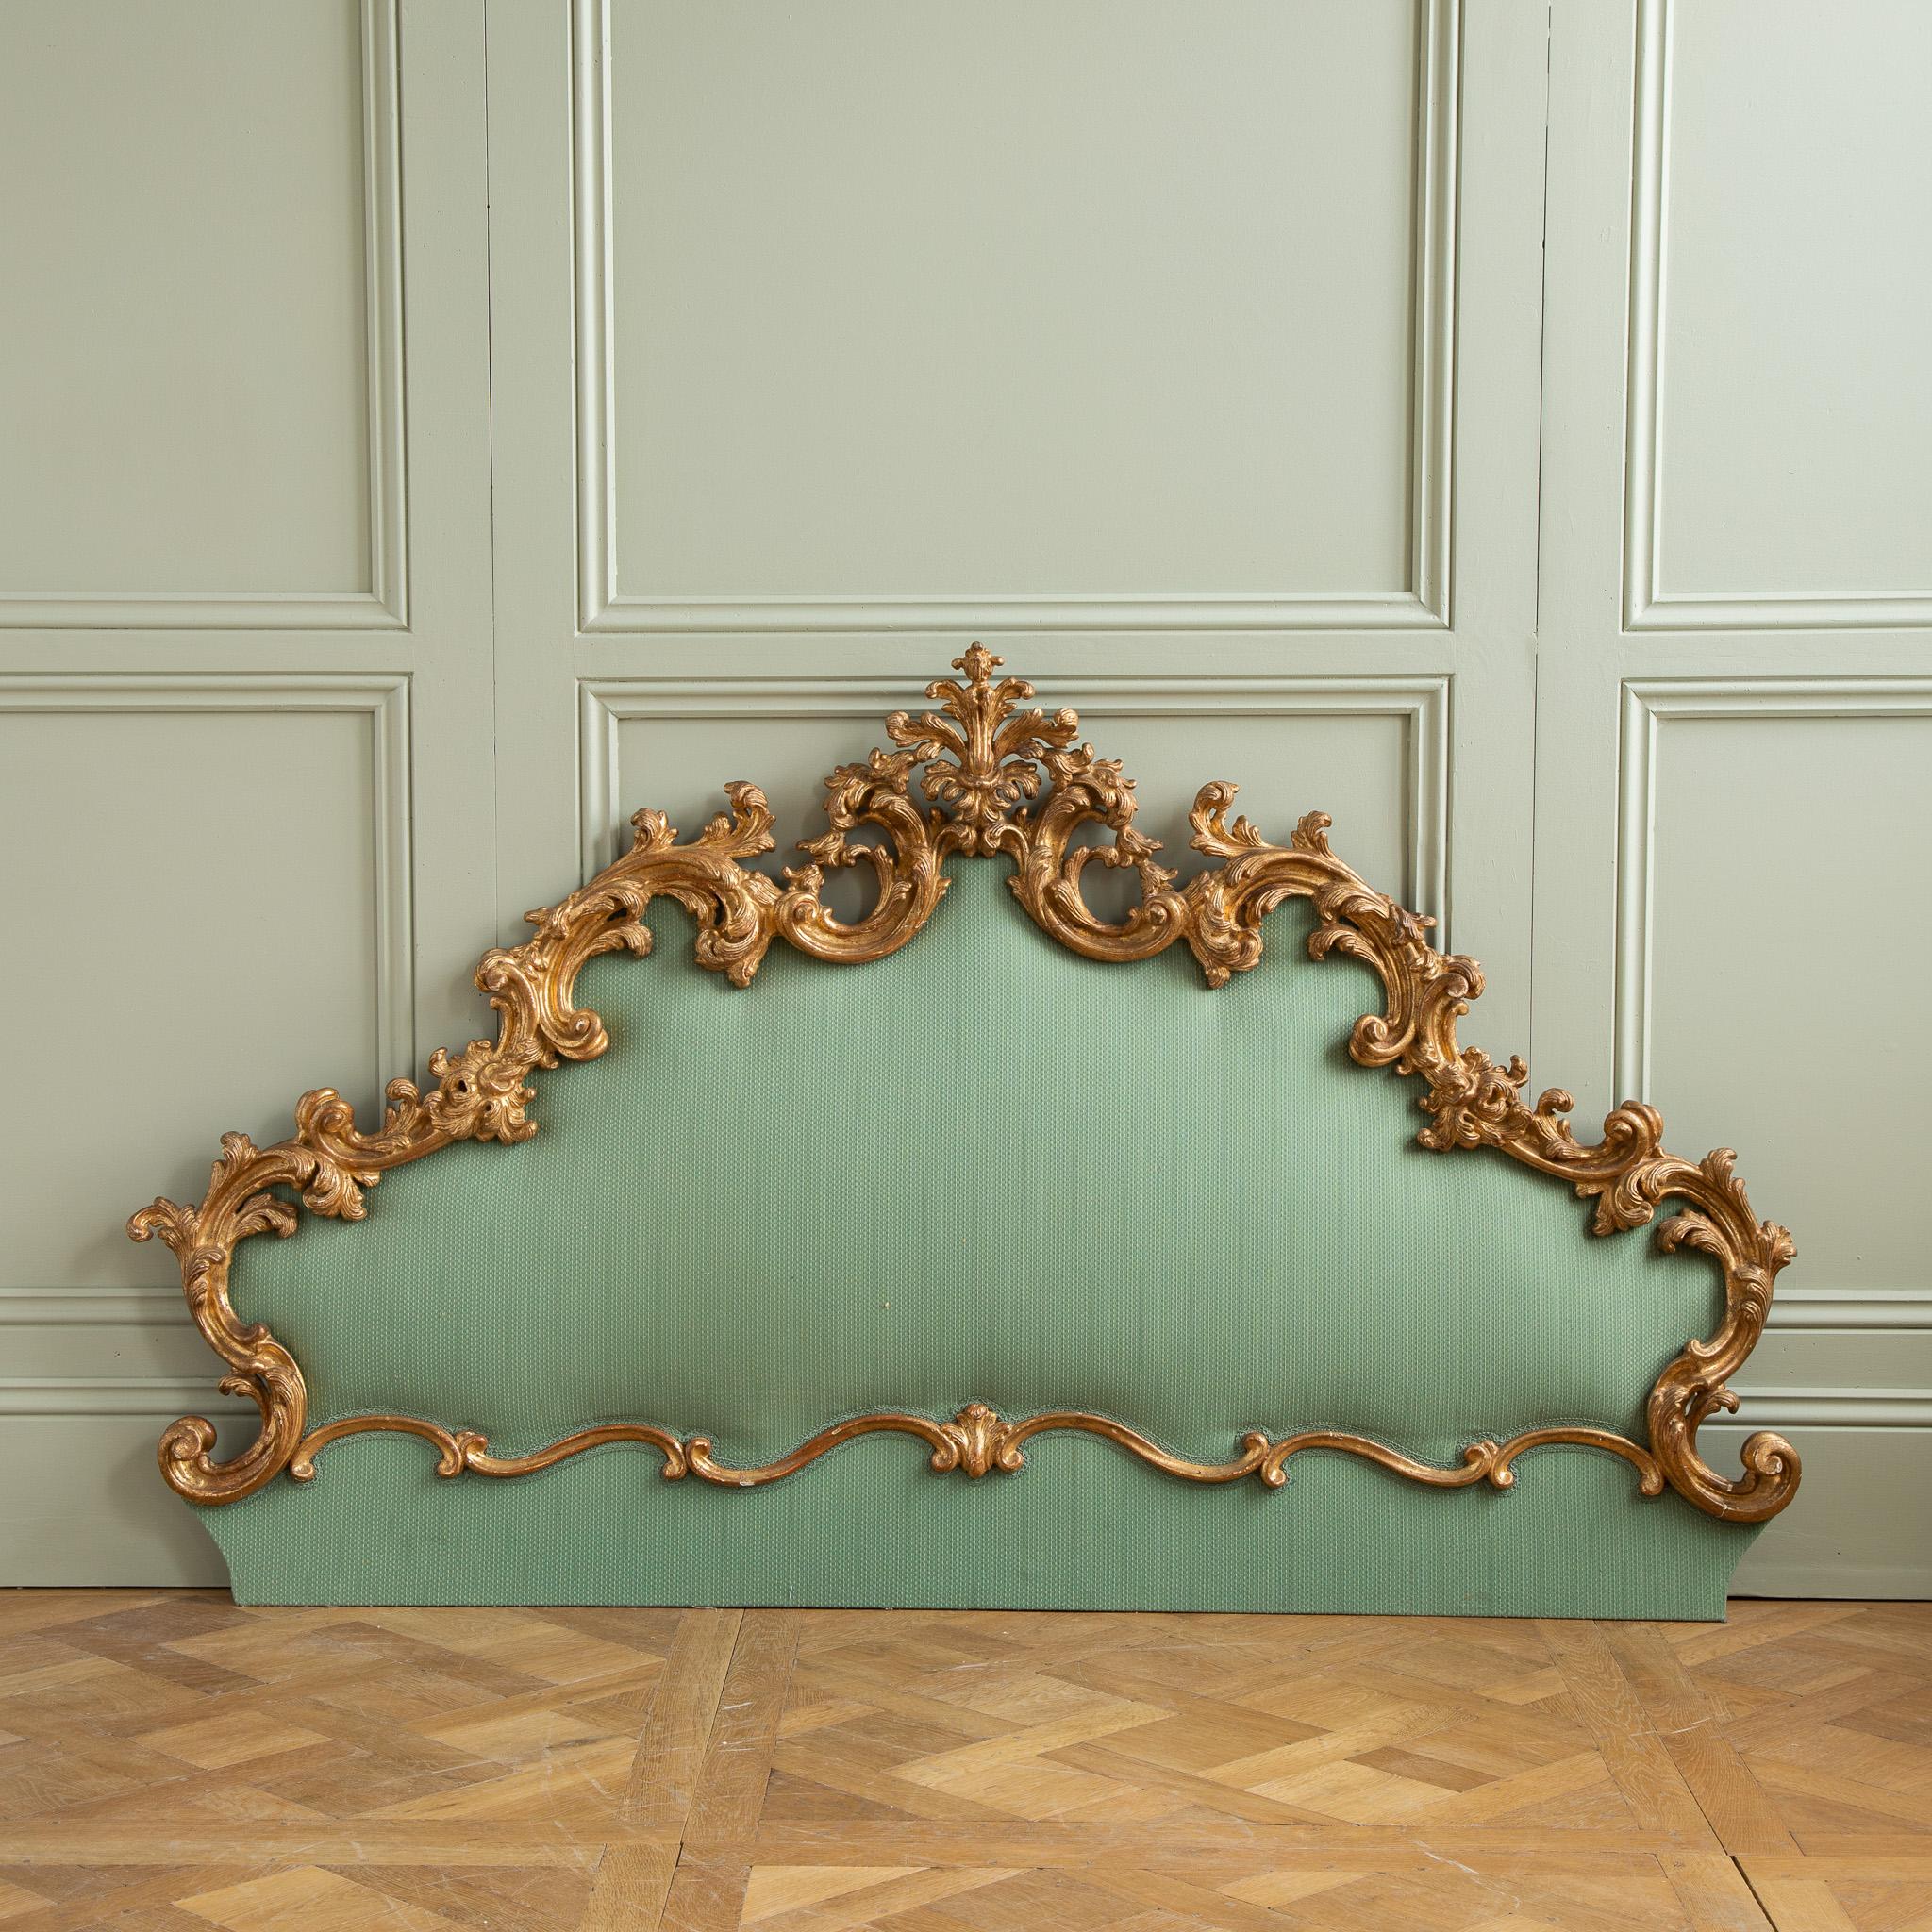 From Italy, home to master craftsmen, an original 19th century Headboard in the Venetian style. The frame features a lyrical, hand carved, design of interlacing S curves embellished with acanthus leaves. The headboard would have been originally made